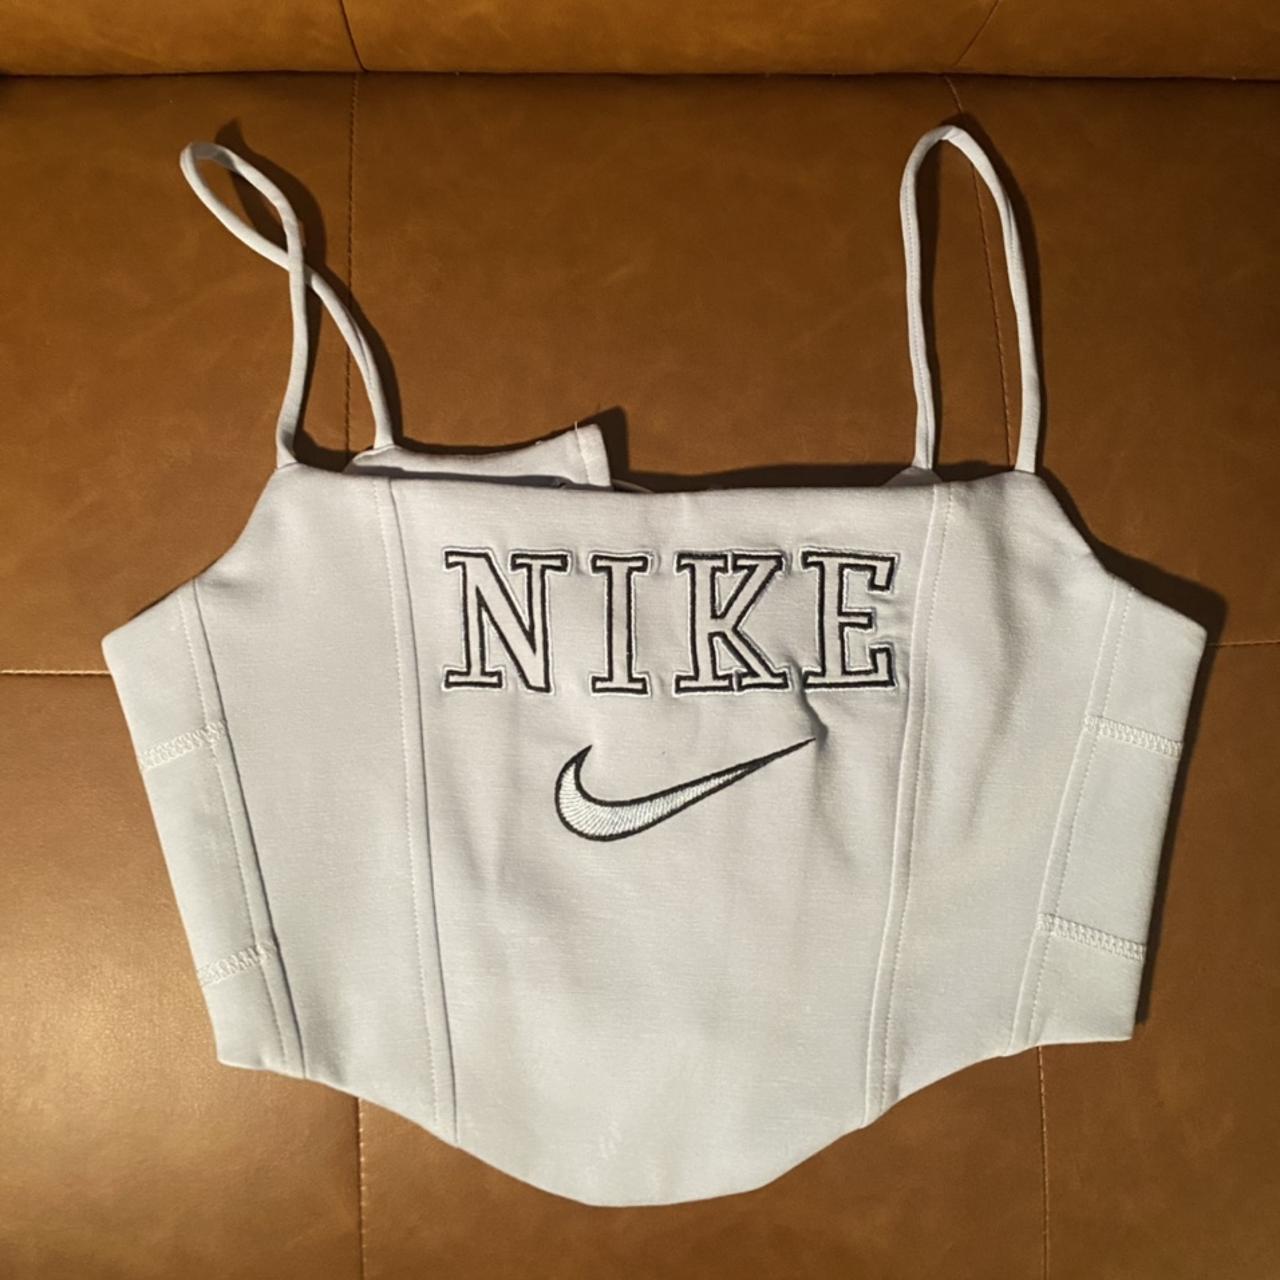 Nike Reworked Corset Top Size: 8 